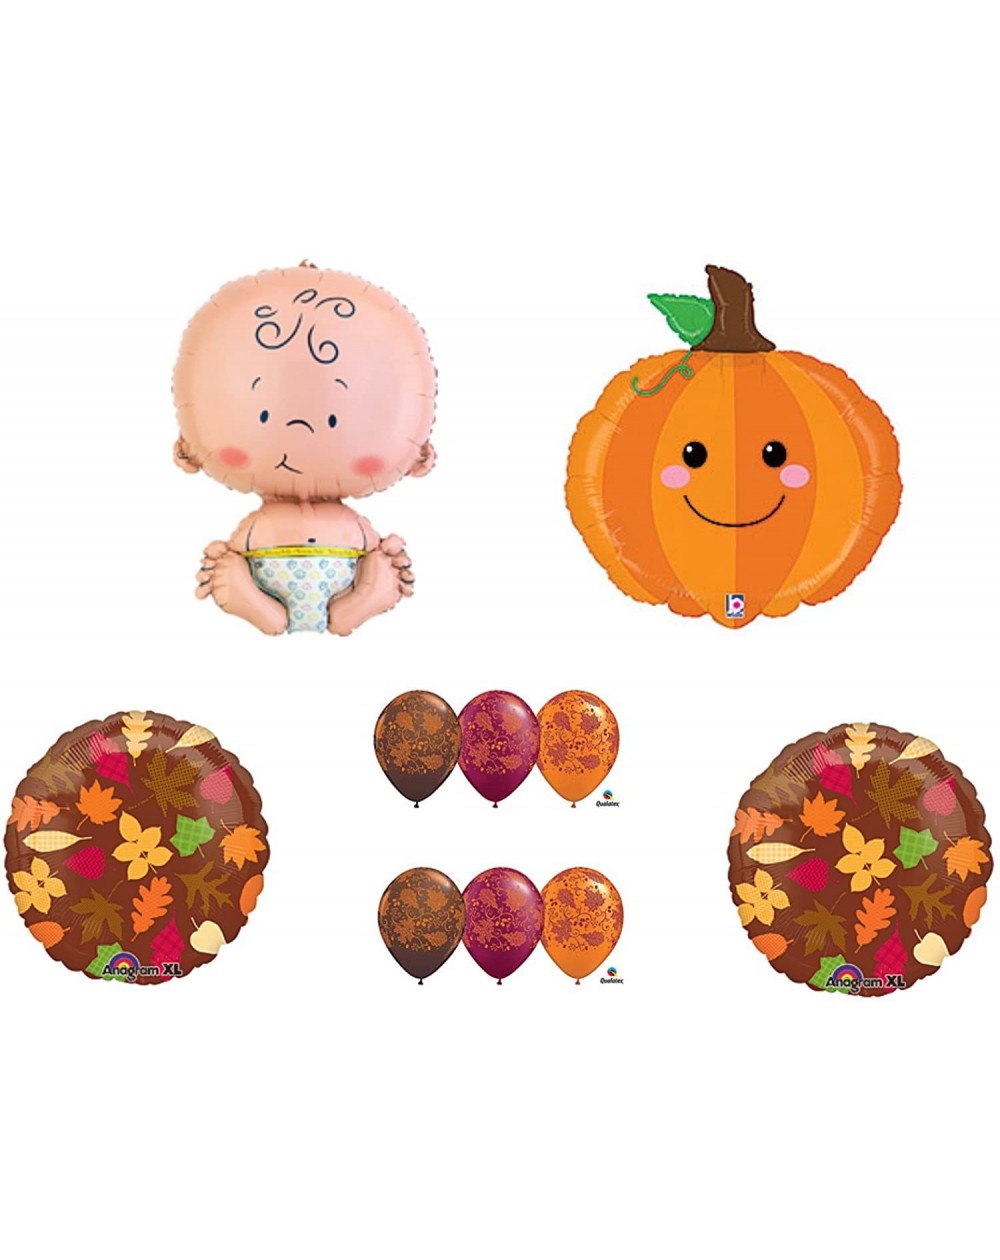 Balloons Cutest Lil Little Pumpkin in The Patch Fall Baby Shower Party Balloons Decorations Supplies - CS1268D7YML $23.57